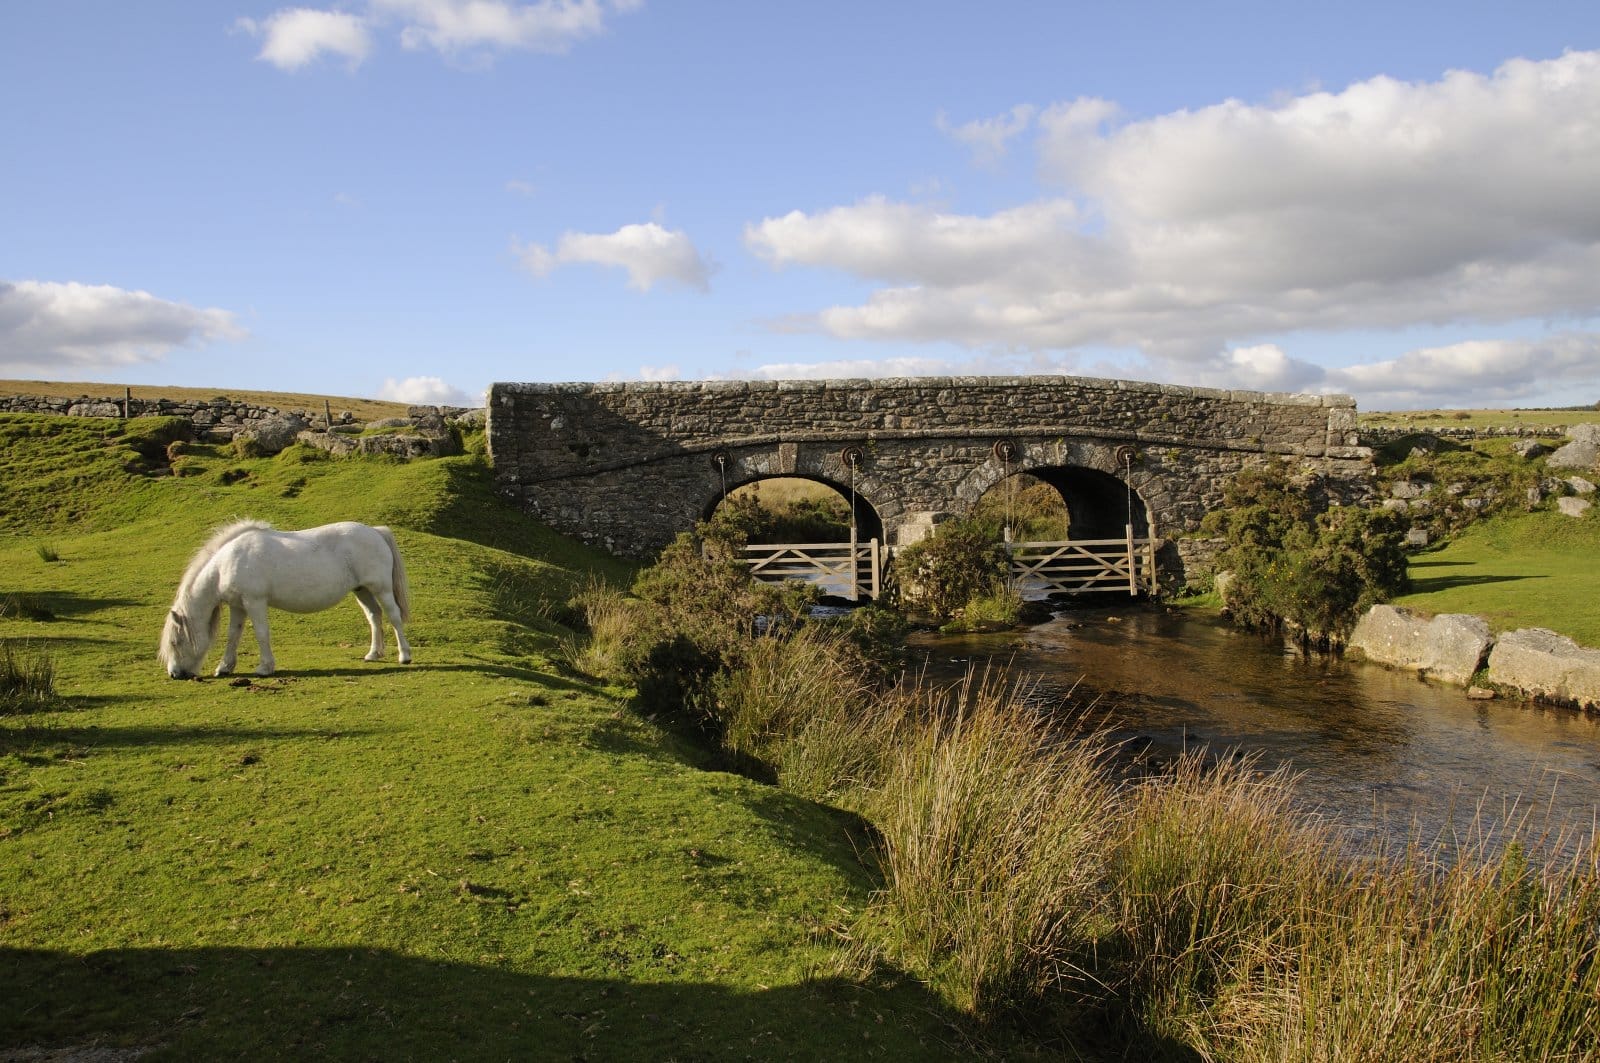 Image Credit: Shutterstock / Peter Titmuss <p>Surrounded by natural beauty, Dartmoor is also encircled by internet connectivity issues. Working remotely here means planning around patchy service.</p>